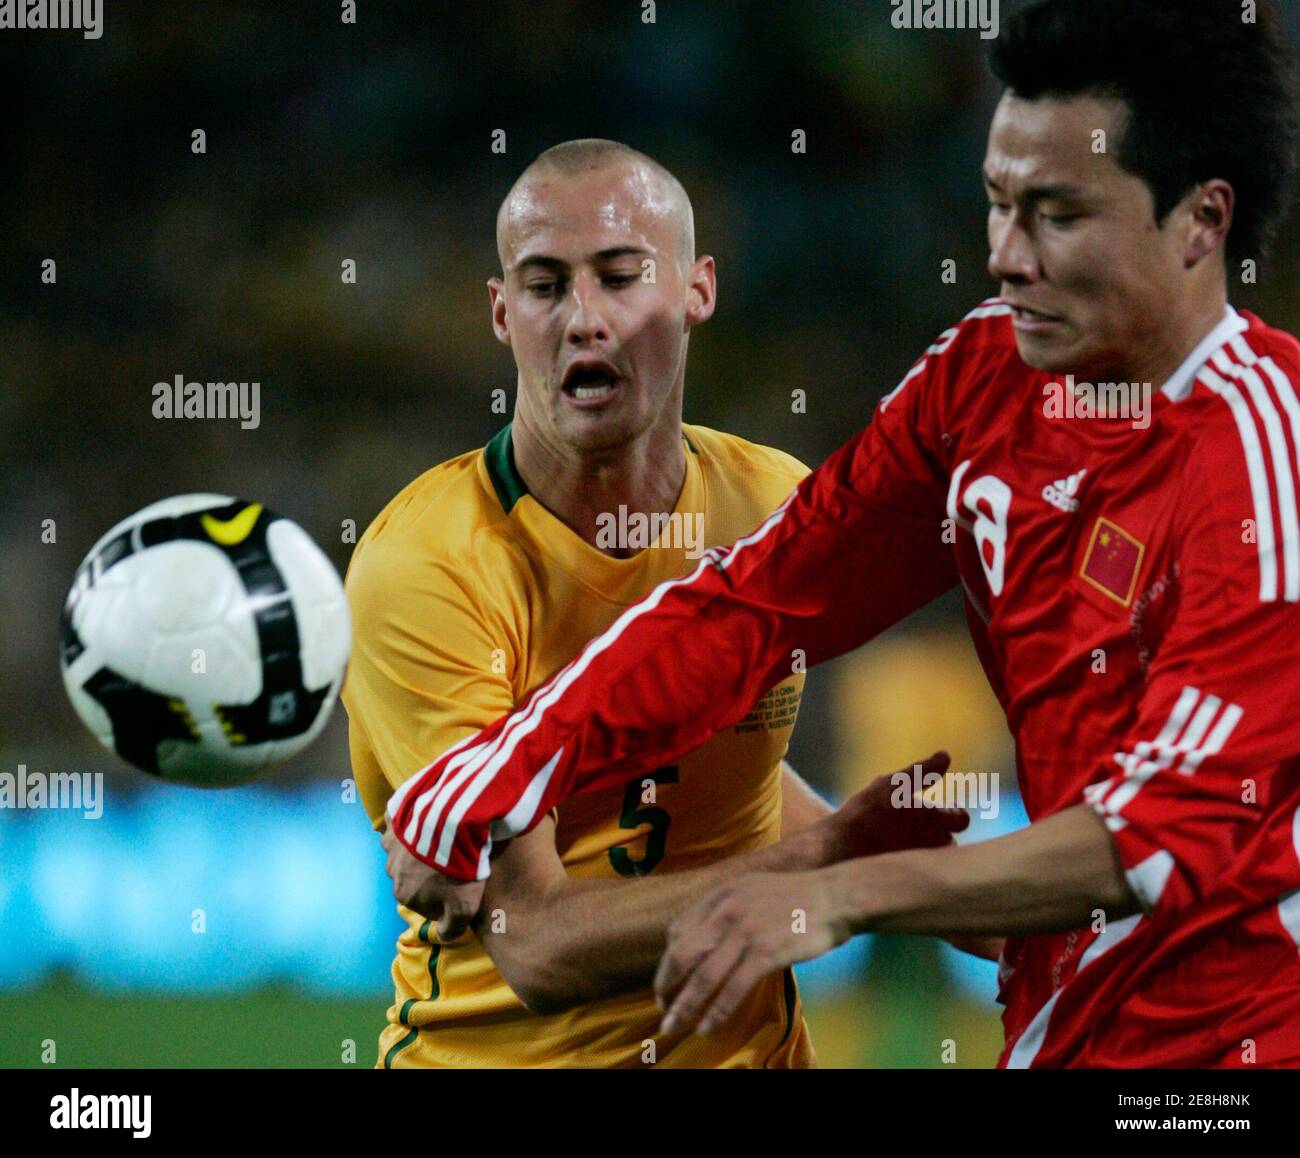 China's Gao Lin (R) battles for the ball against Australia's Ruben Zadkovich during their 2010 FIFA World Cup qualifier soccer match in Sydney June 22, 2008. REUTERS/Will Burgess (AUSTRALIA) Stock Photo